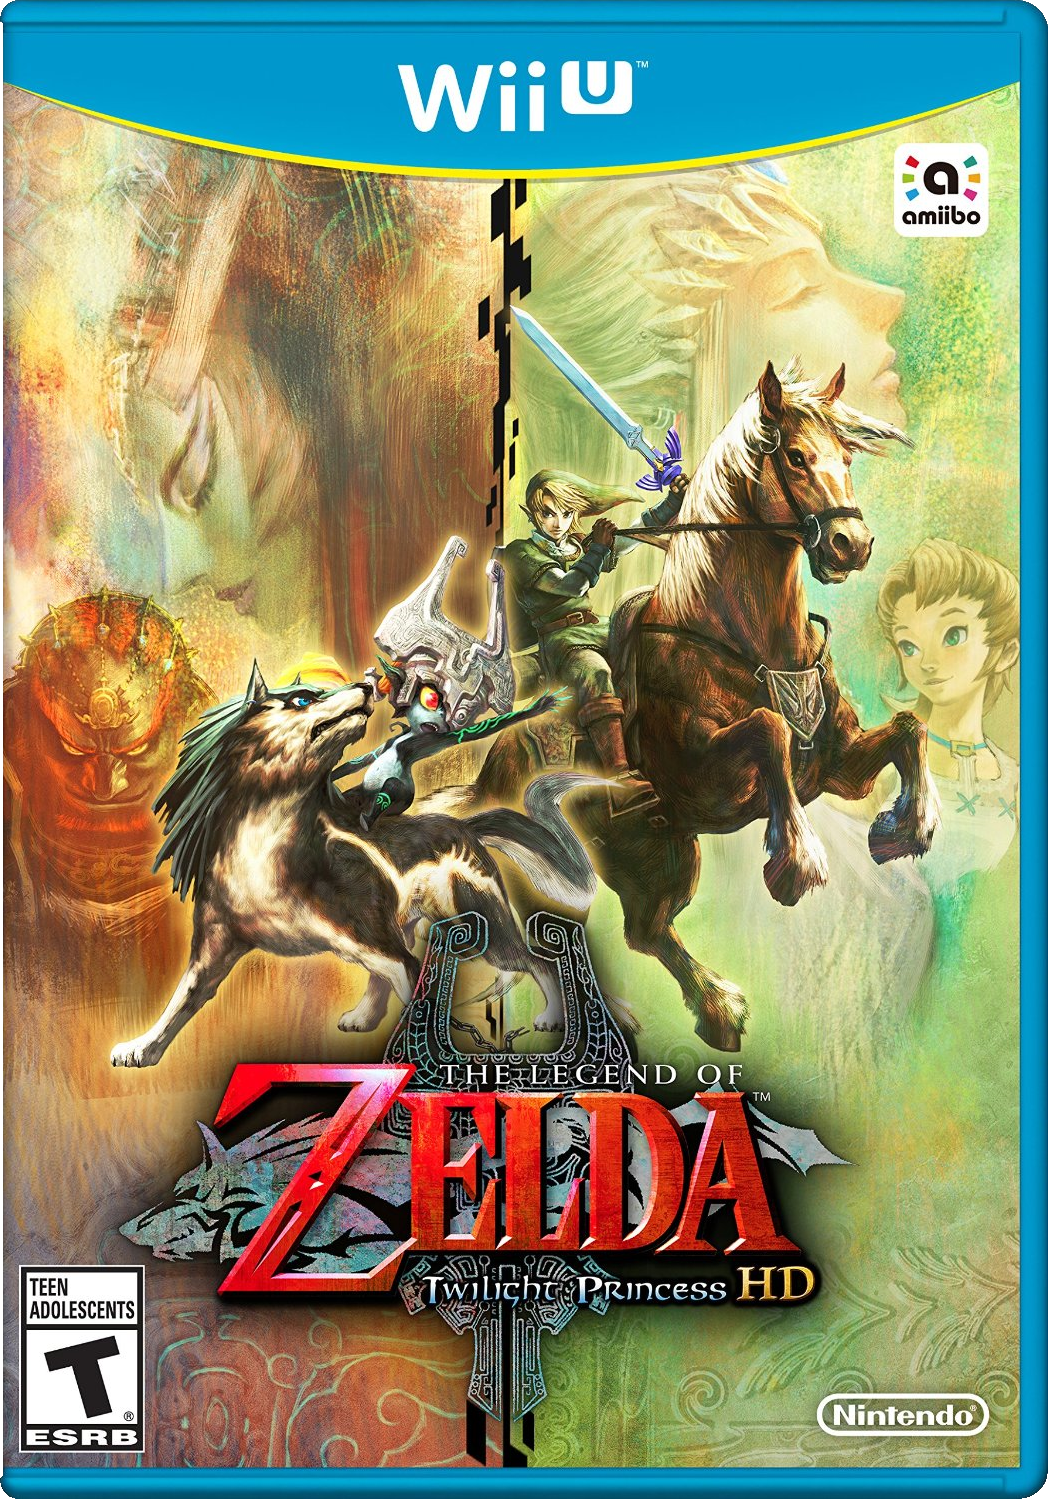 twilight princess coming to switch